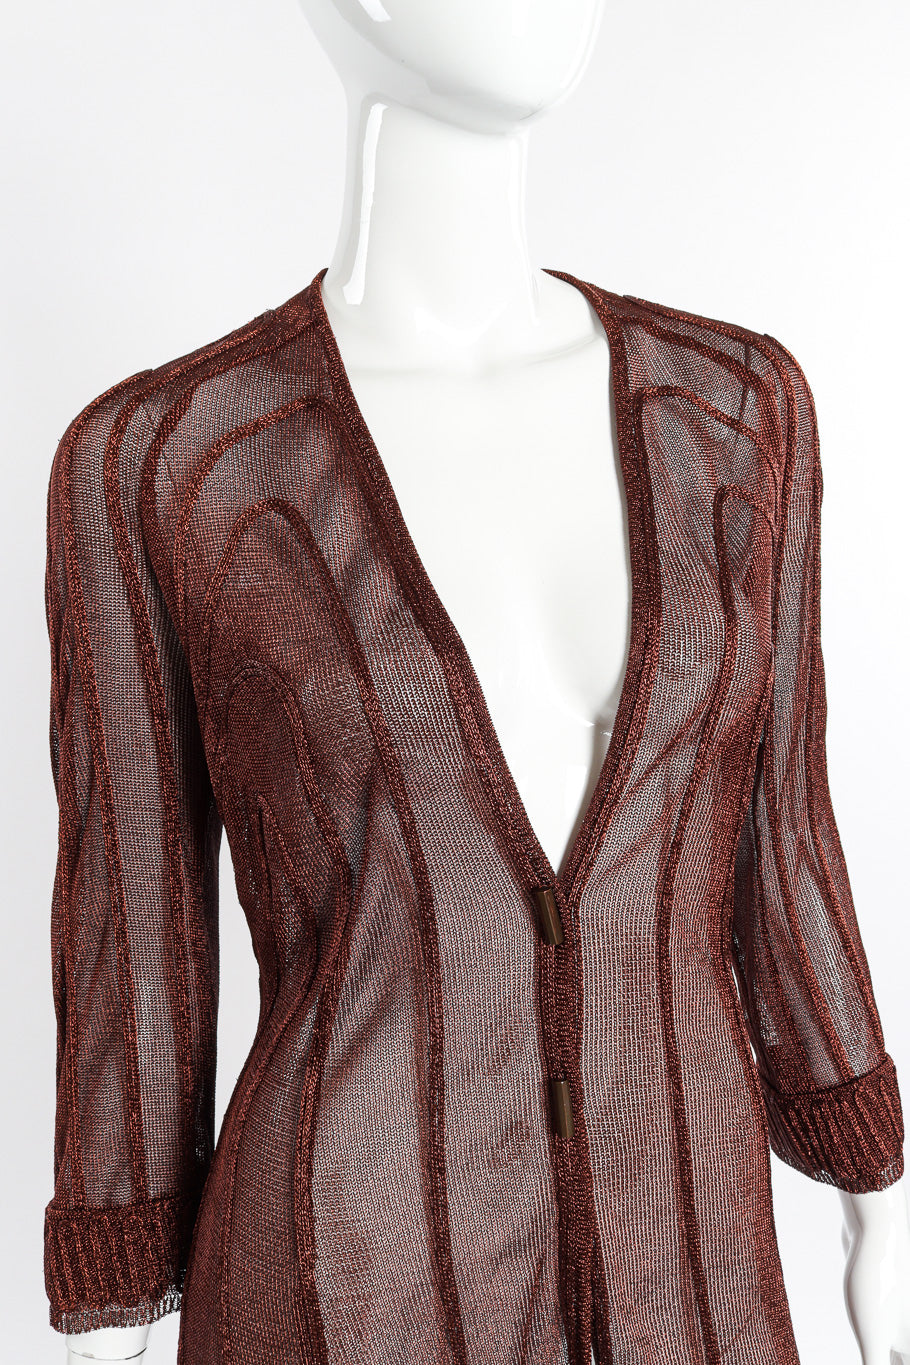 Vintage Thierry Mugler Metallic Cable Cardigan front on mannequin closeup @recessla